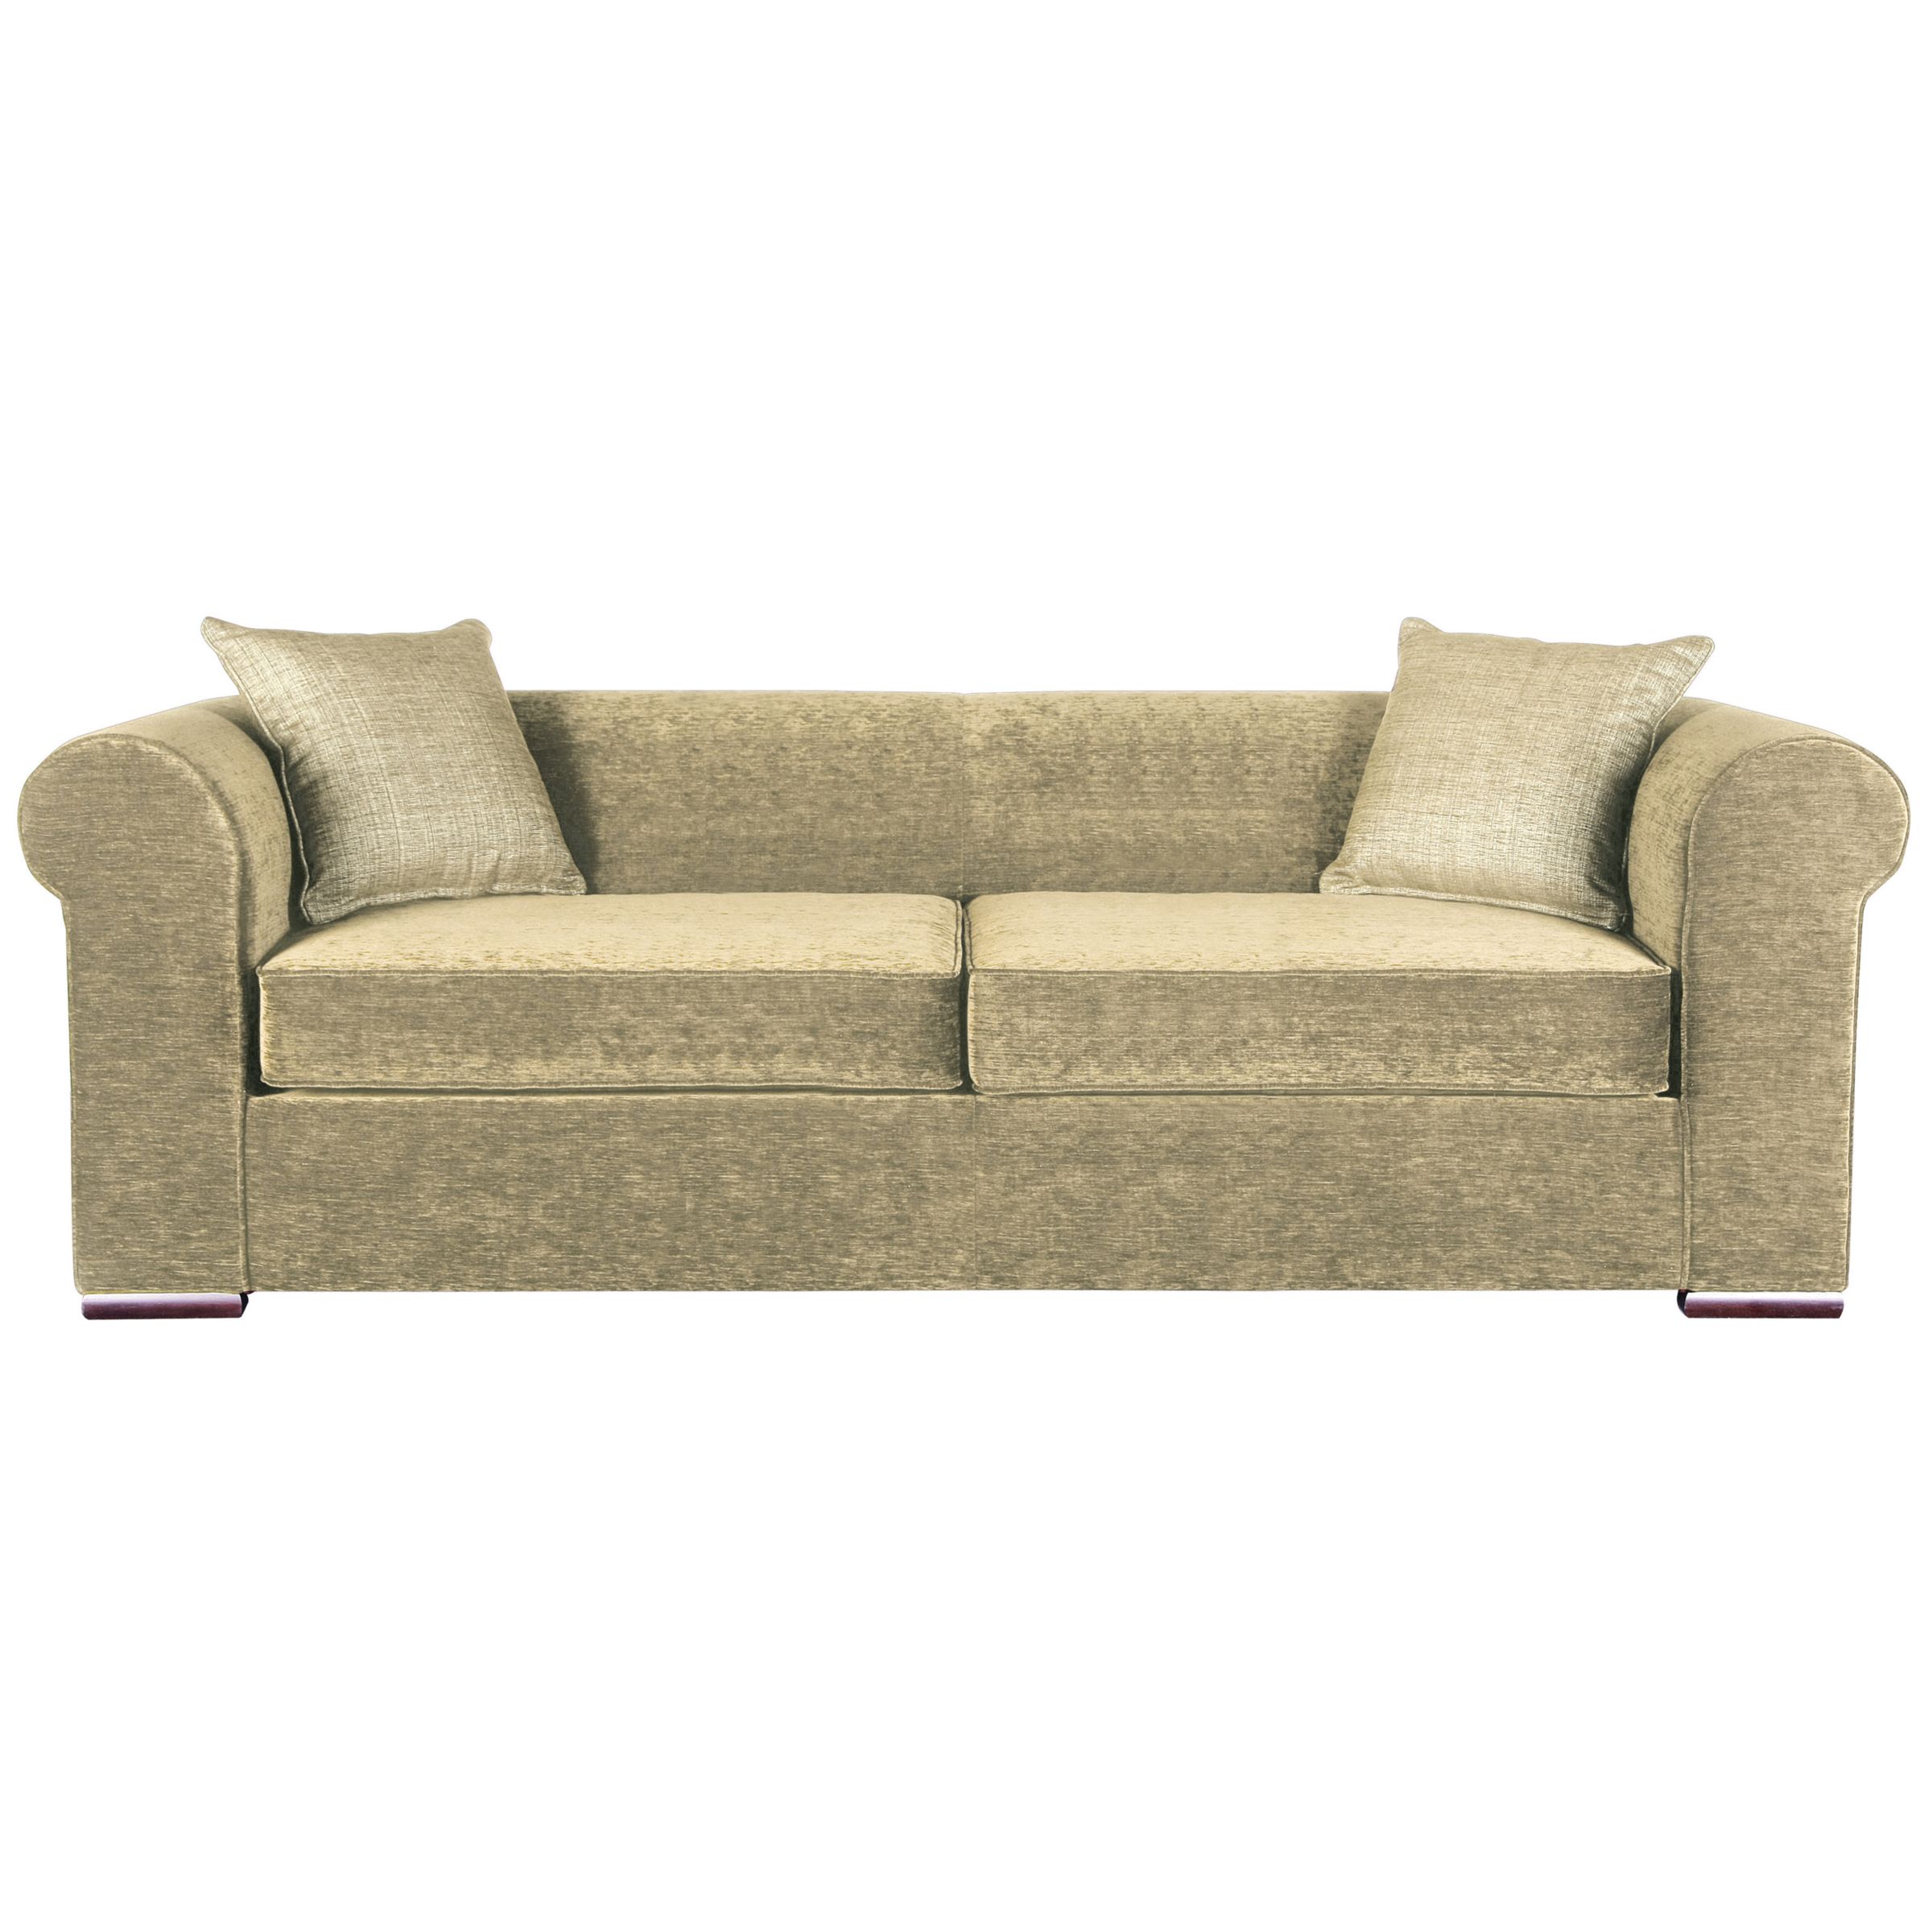 Chilton Grand Sofa Bed with Sprung